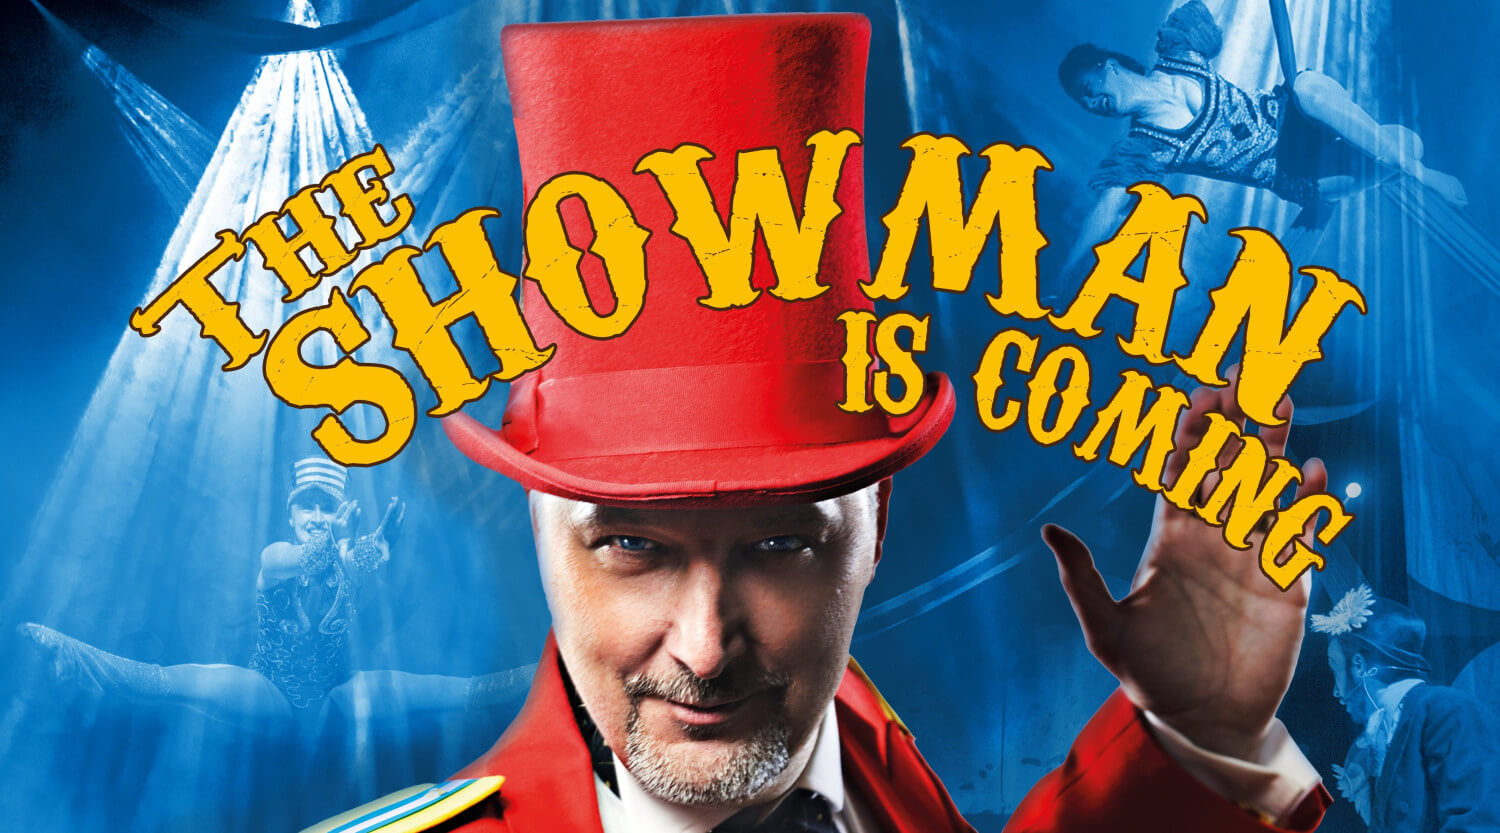 The Showman is Coming Peter Corry 